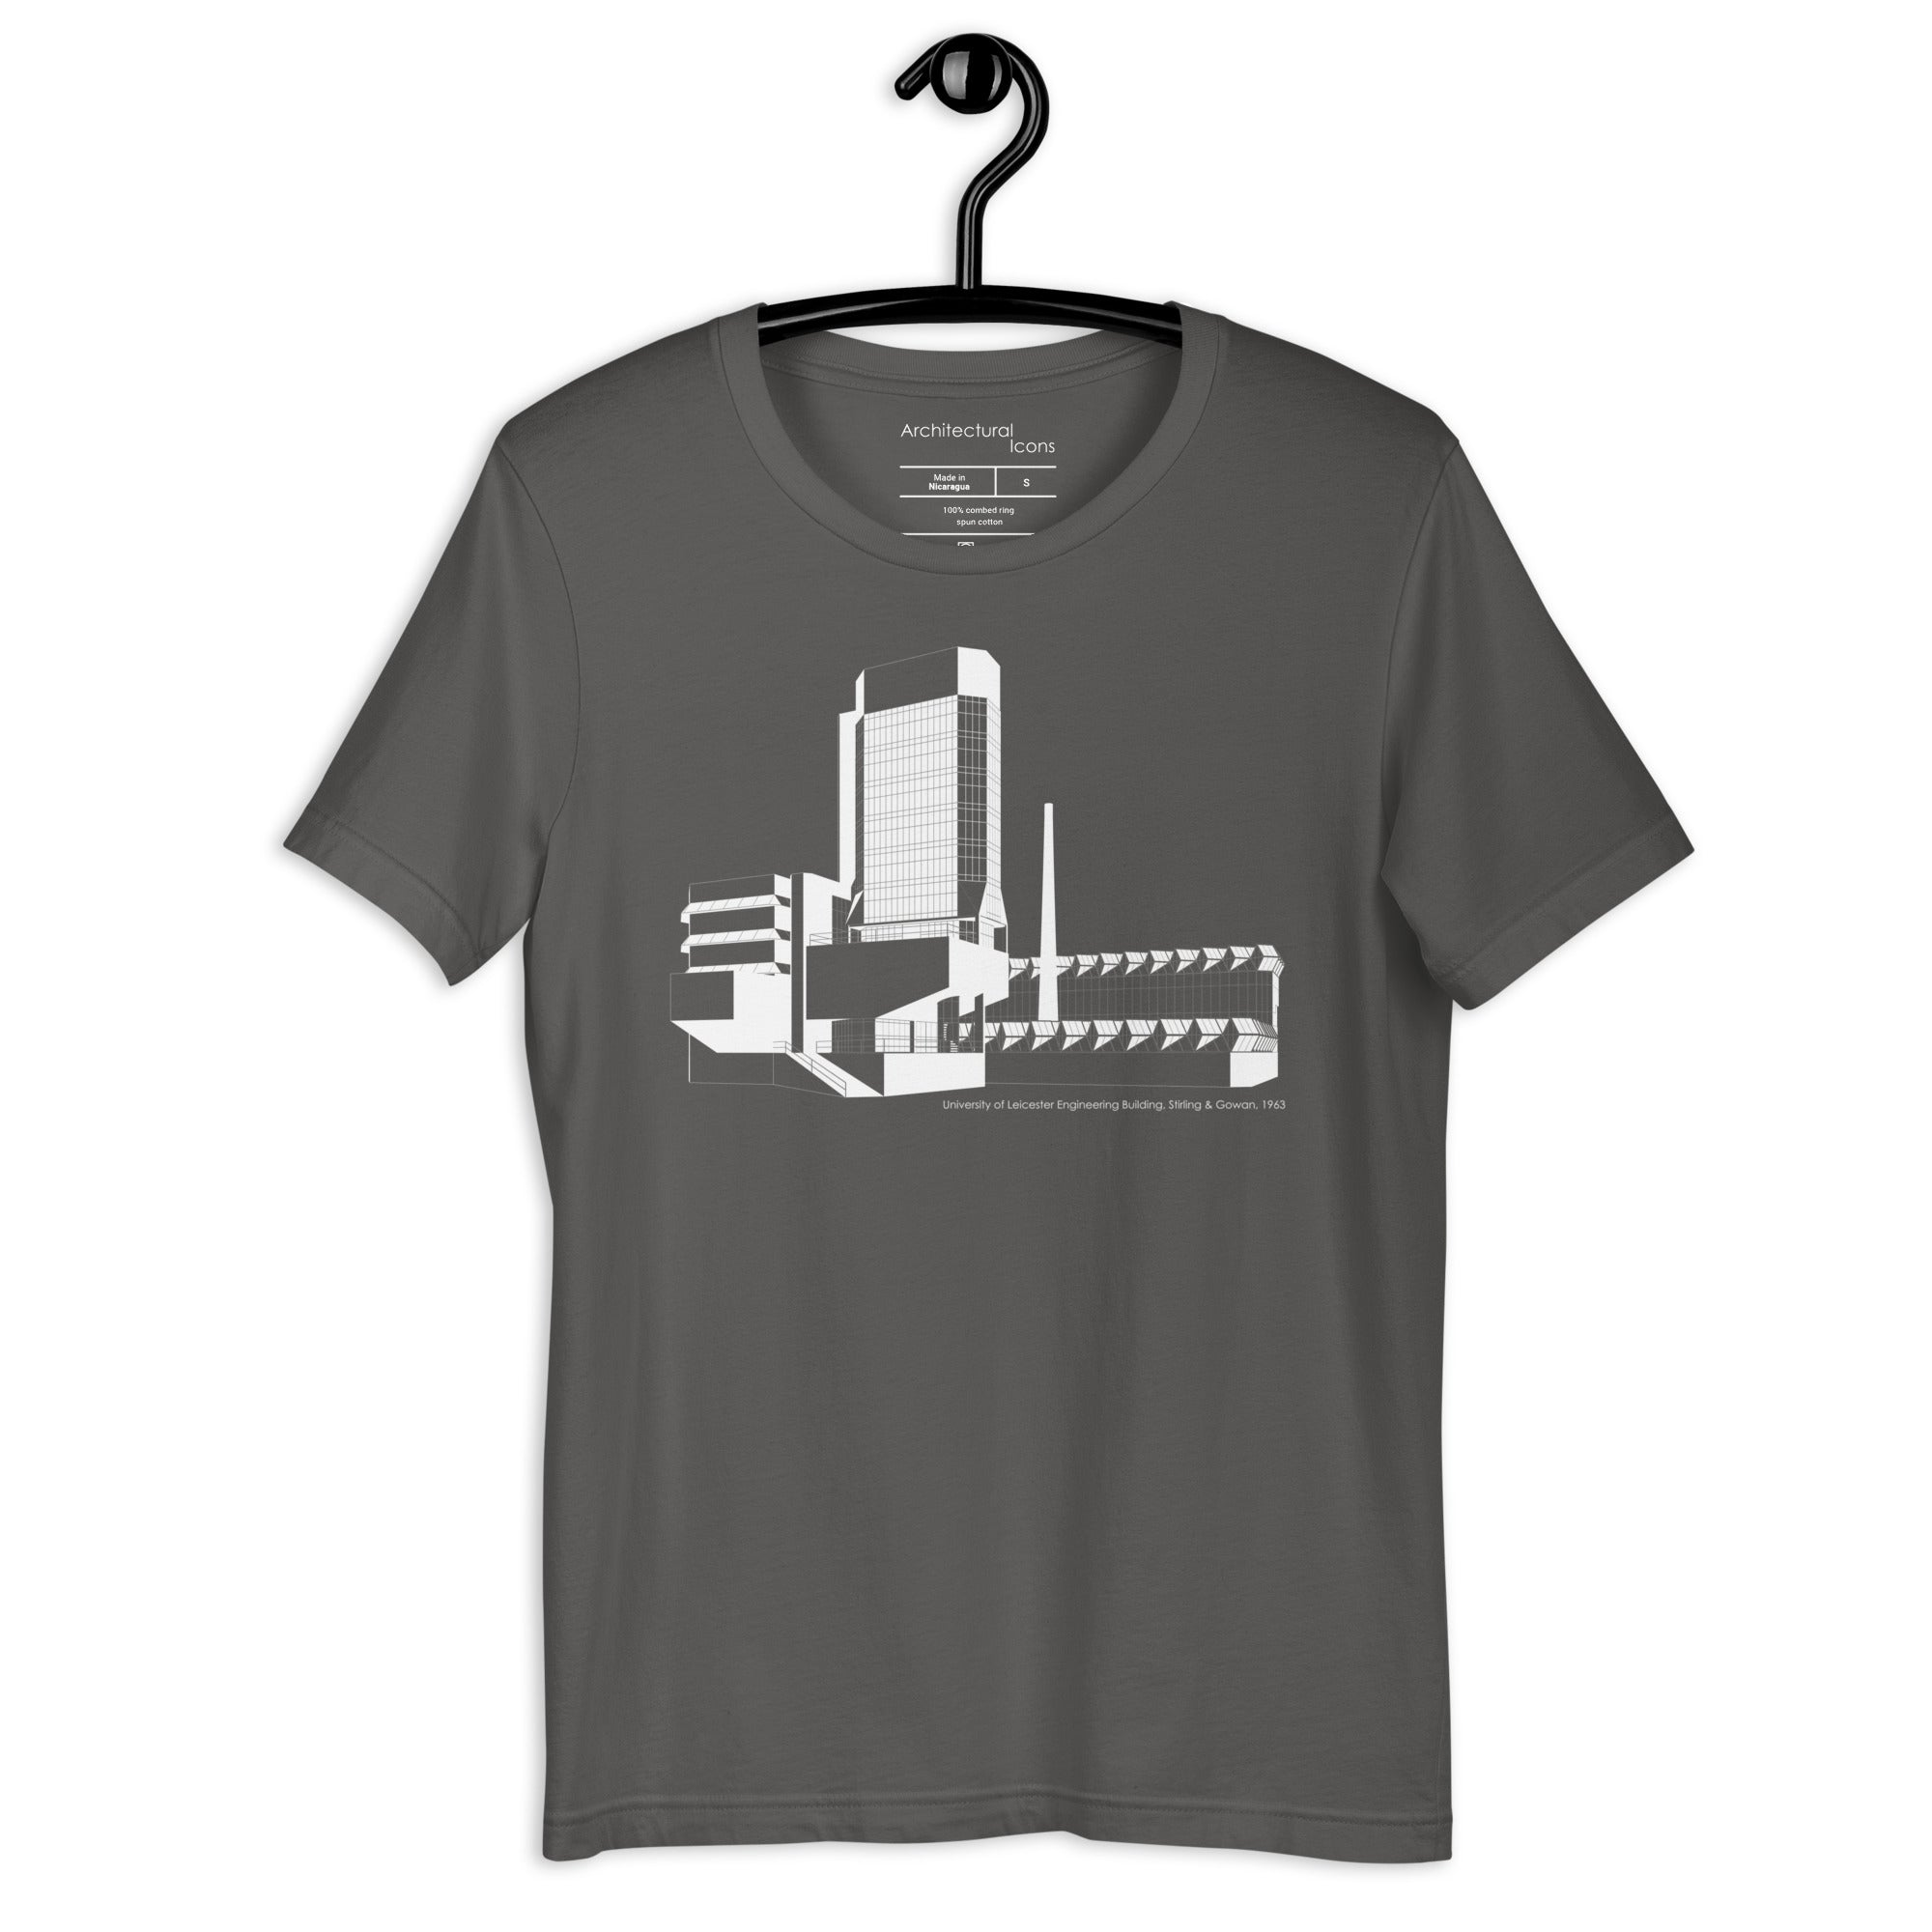 University of Leicester Engineering Building T-Shirts